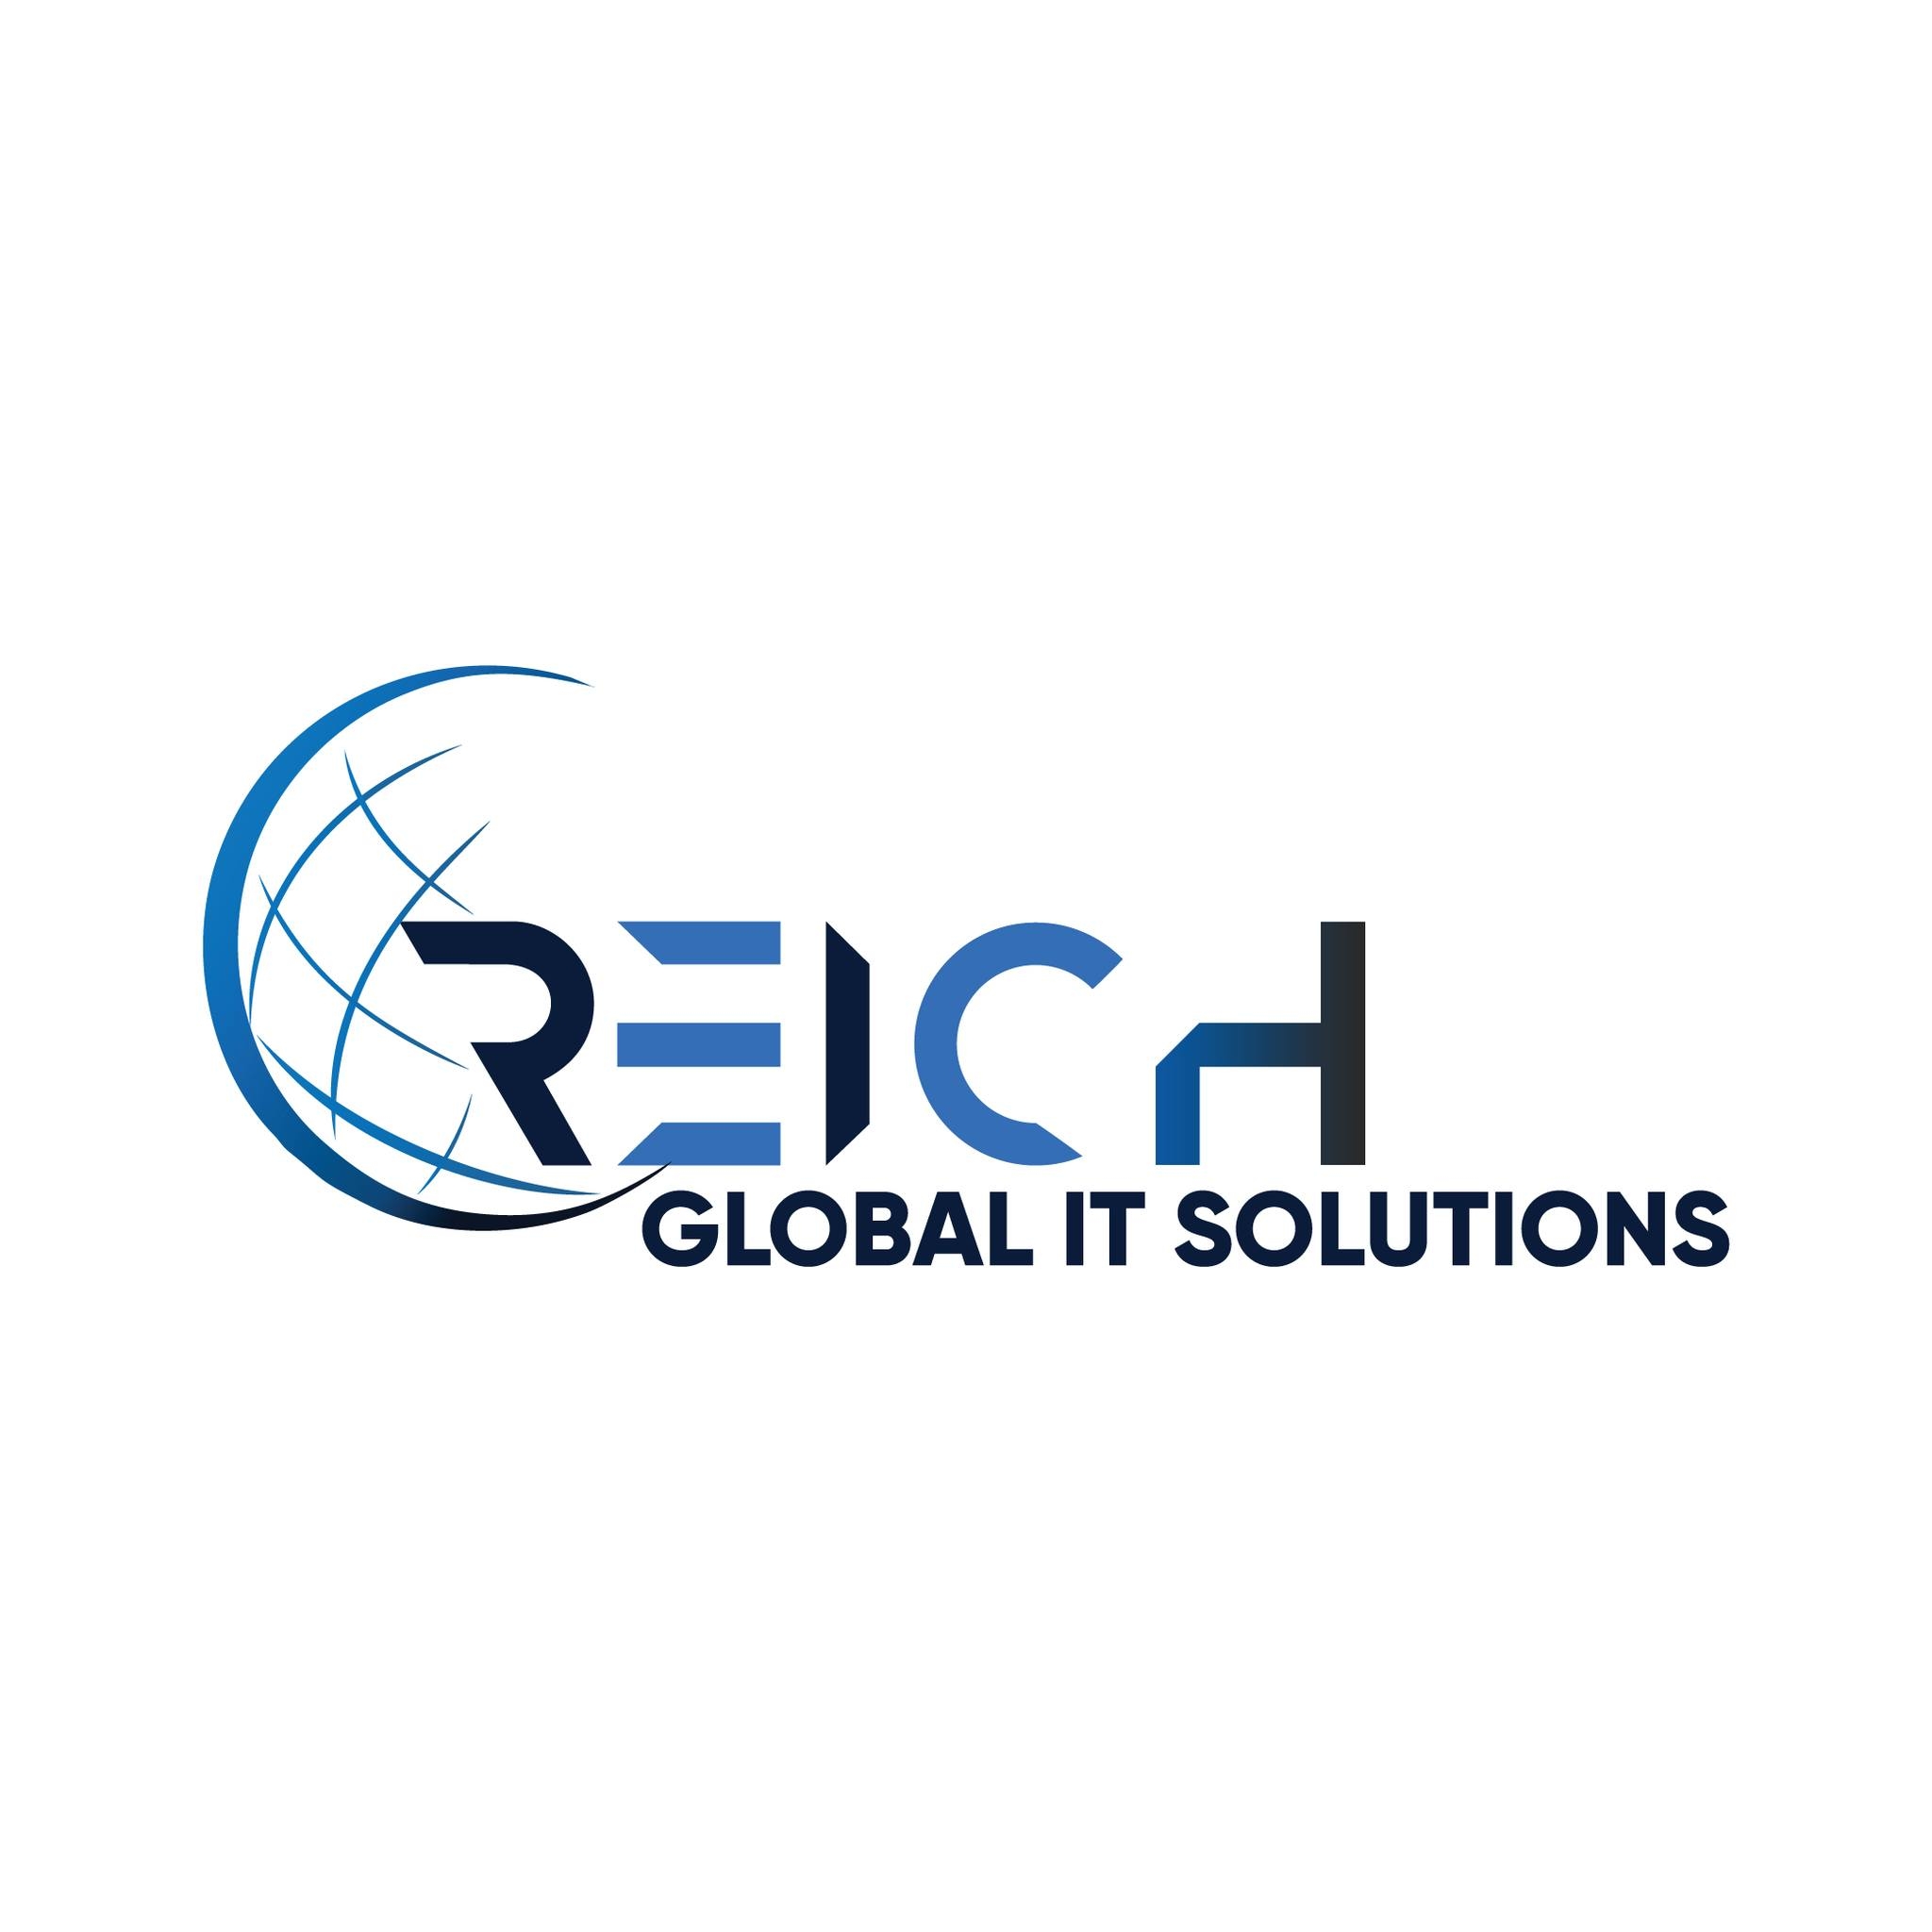 Reich Global IT Solutions